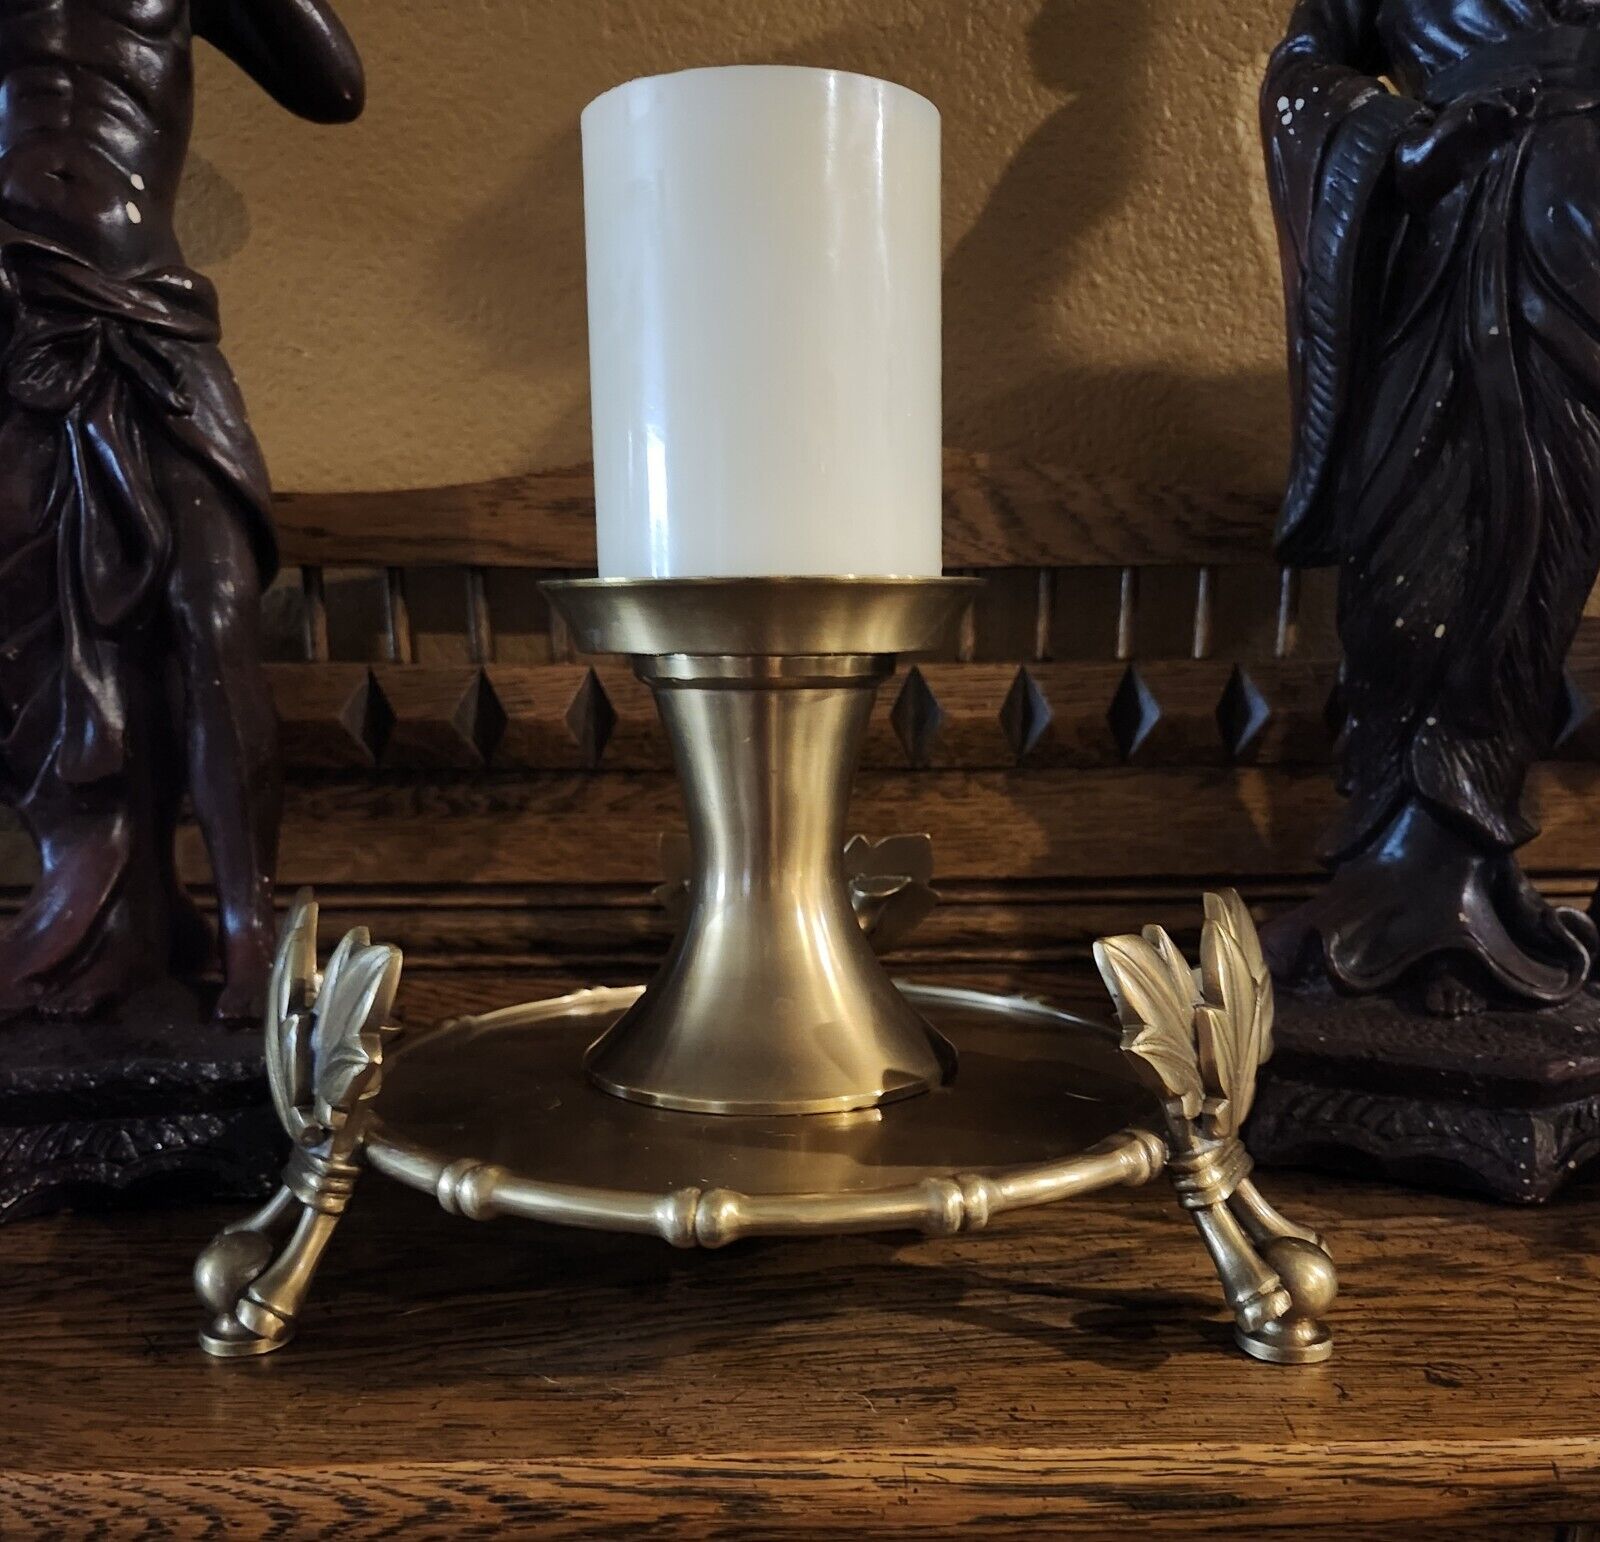 Solid Brass Ornate Design Very Heavy Candle Holder-Candle Not Included